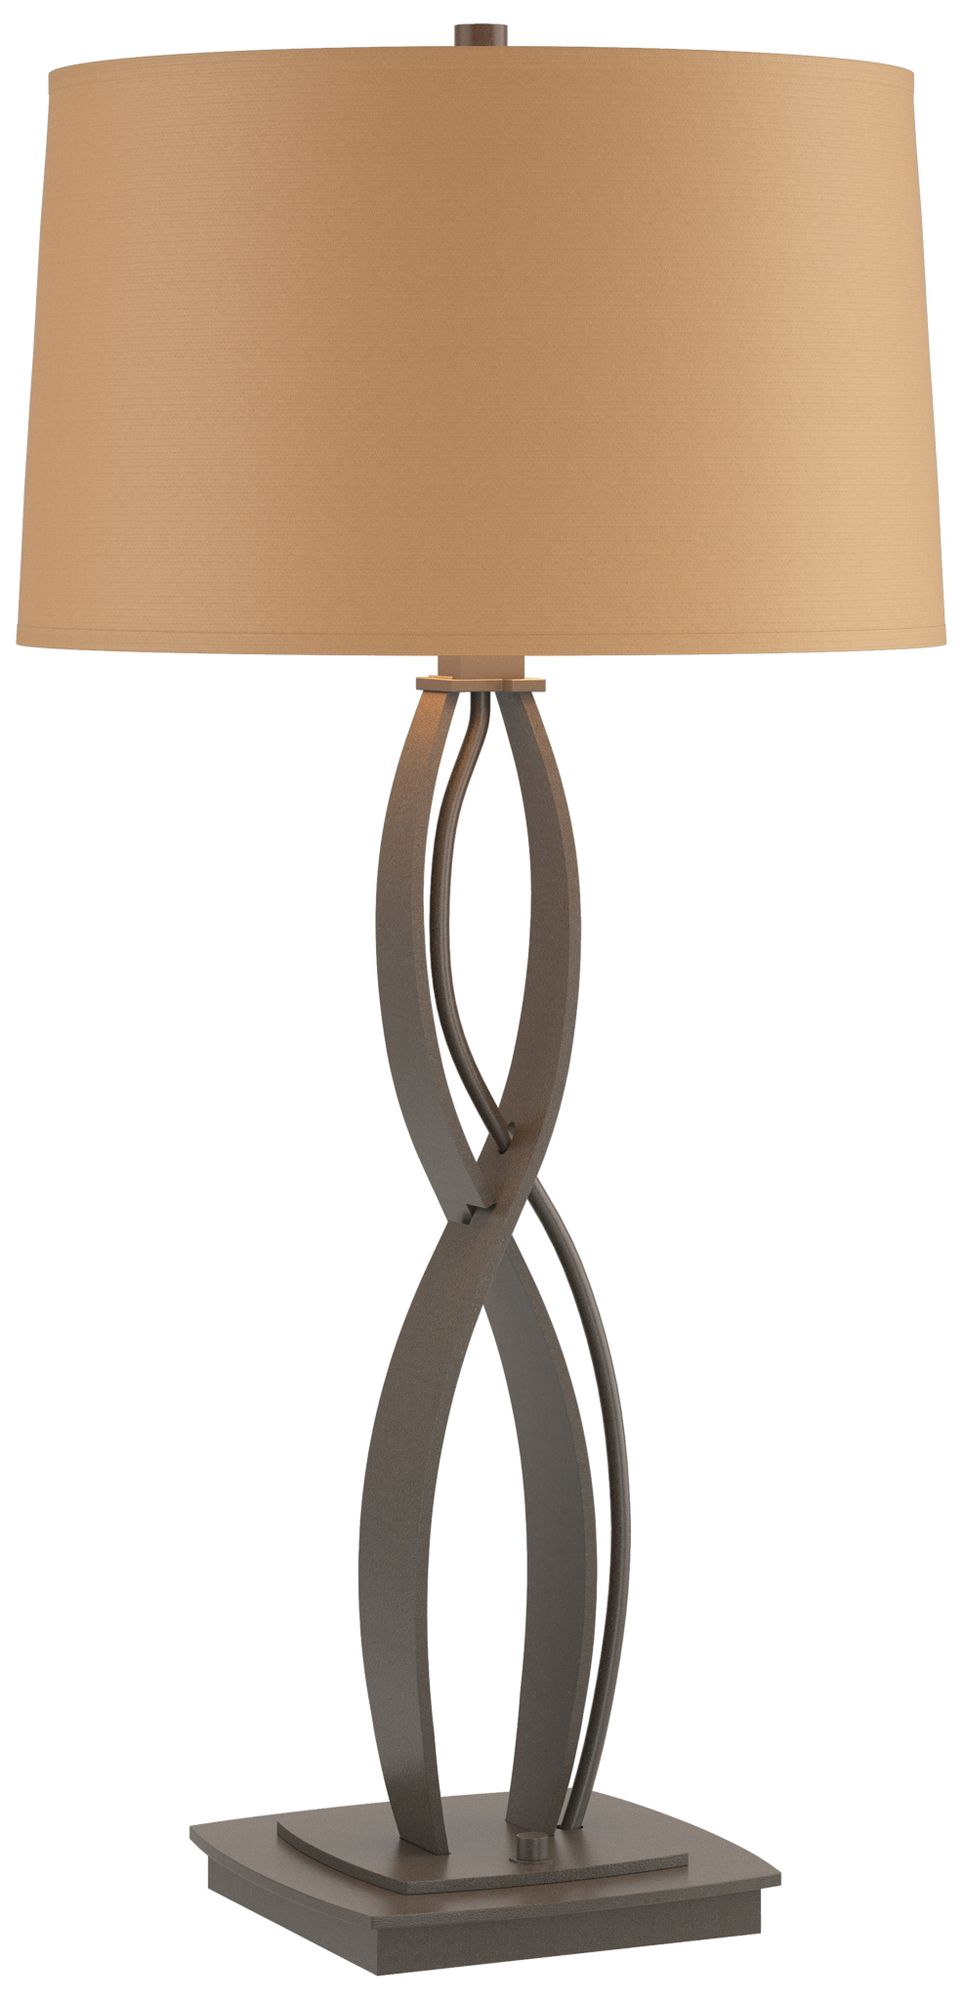 Almost Infinity 31"H Tall Dark Smoke Table Lamp w/ Doeskin Suede Shade